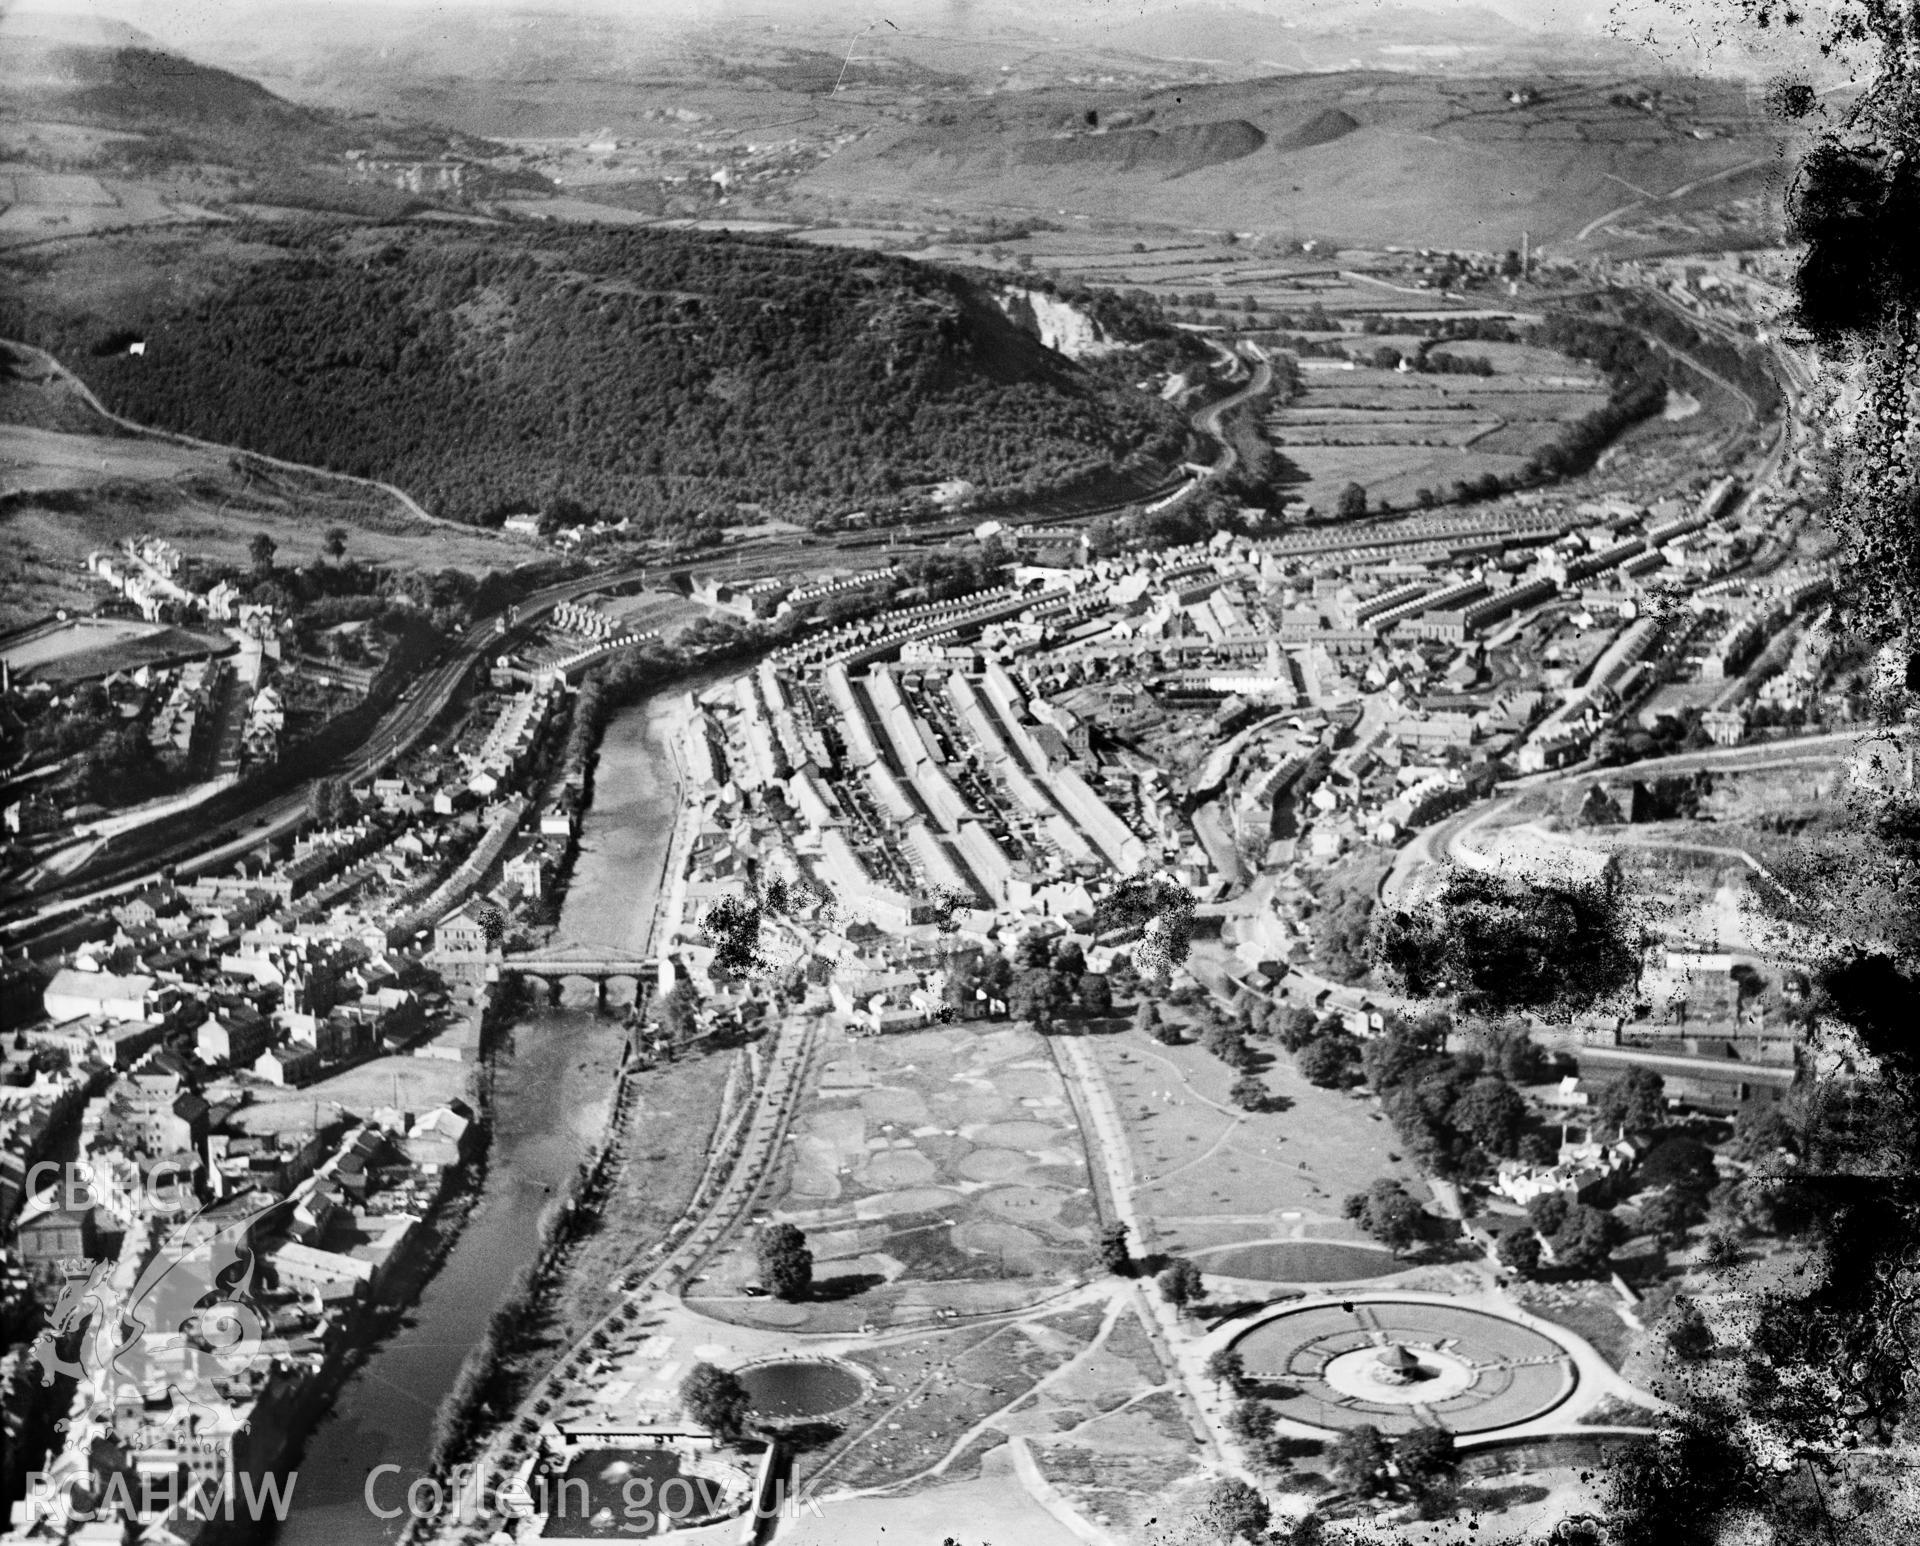 General view of Pontypridd, showing Ynysangharad Park, oblique aerial view. 5?x4? black and white glass plate negative.